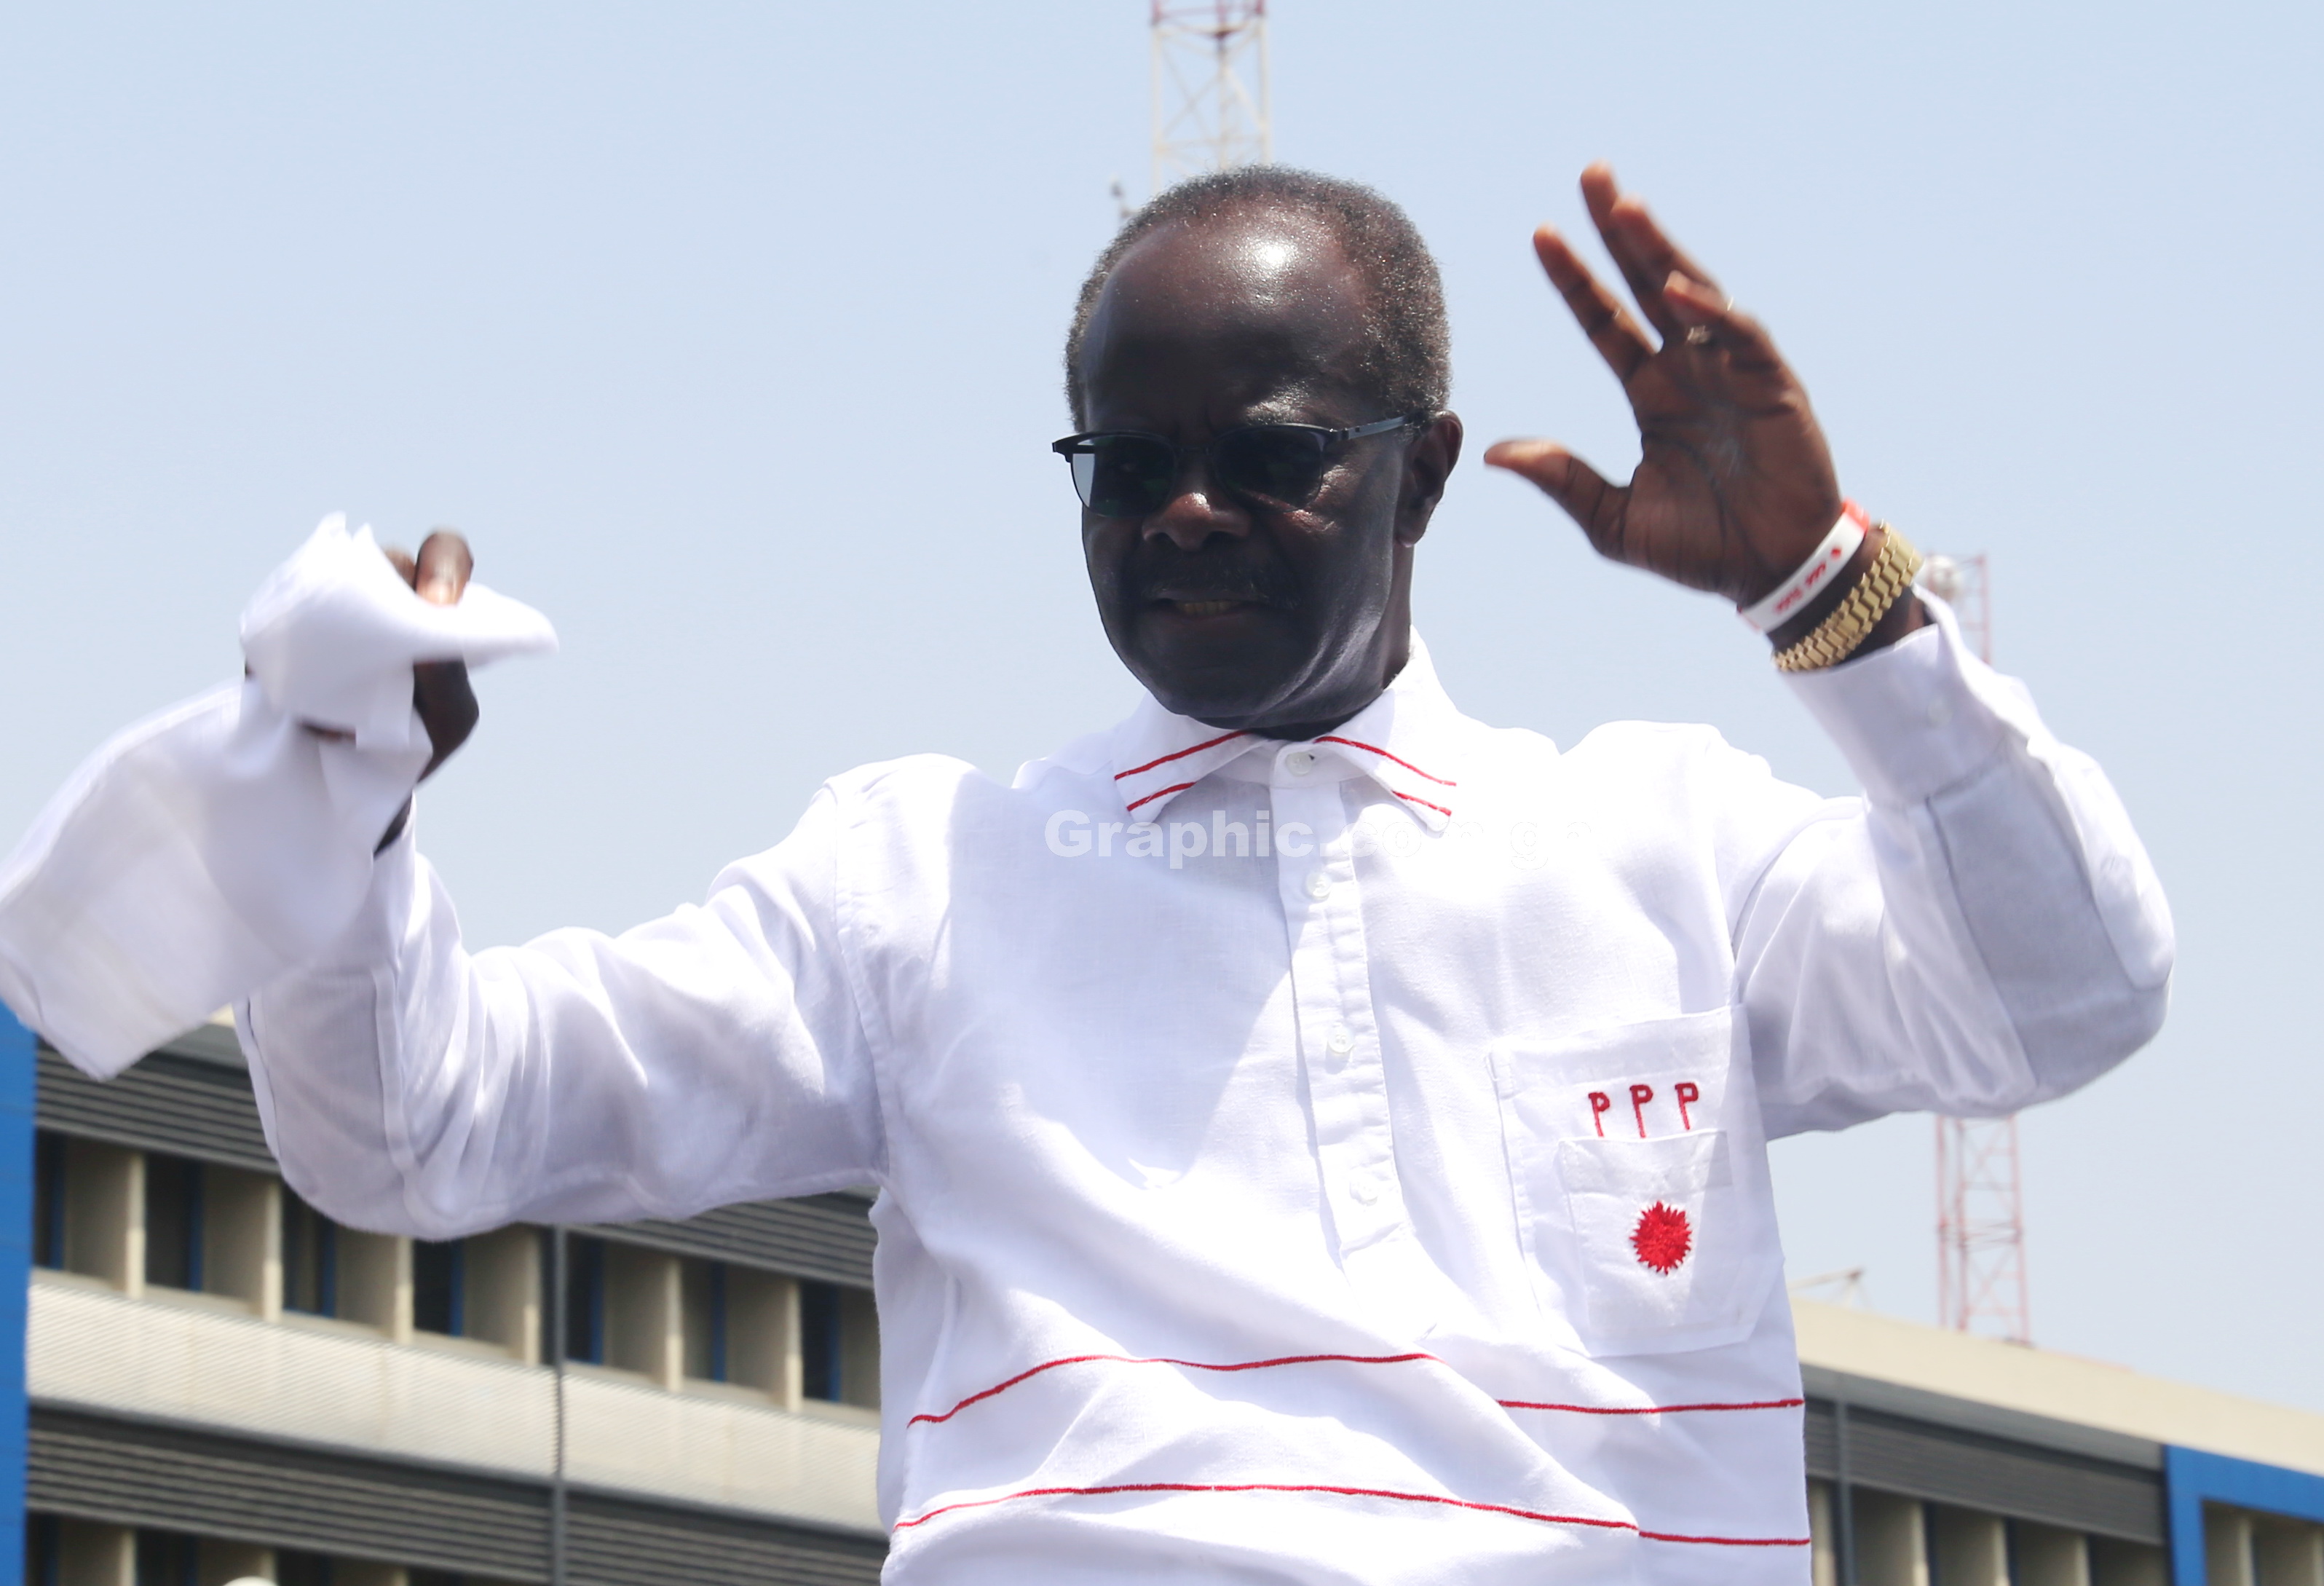 Founder and Leader of the PPP, Dr Papa Kwesi Nduom